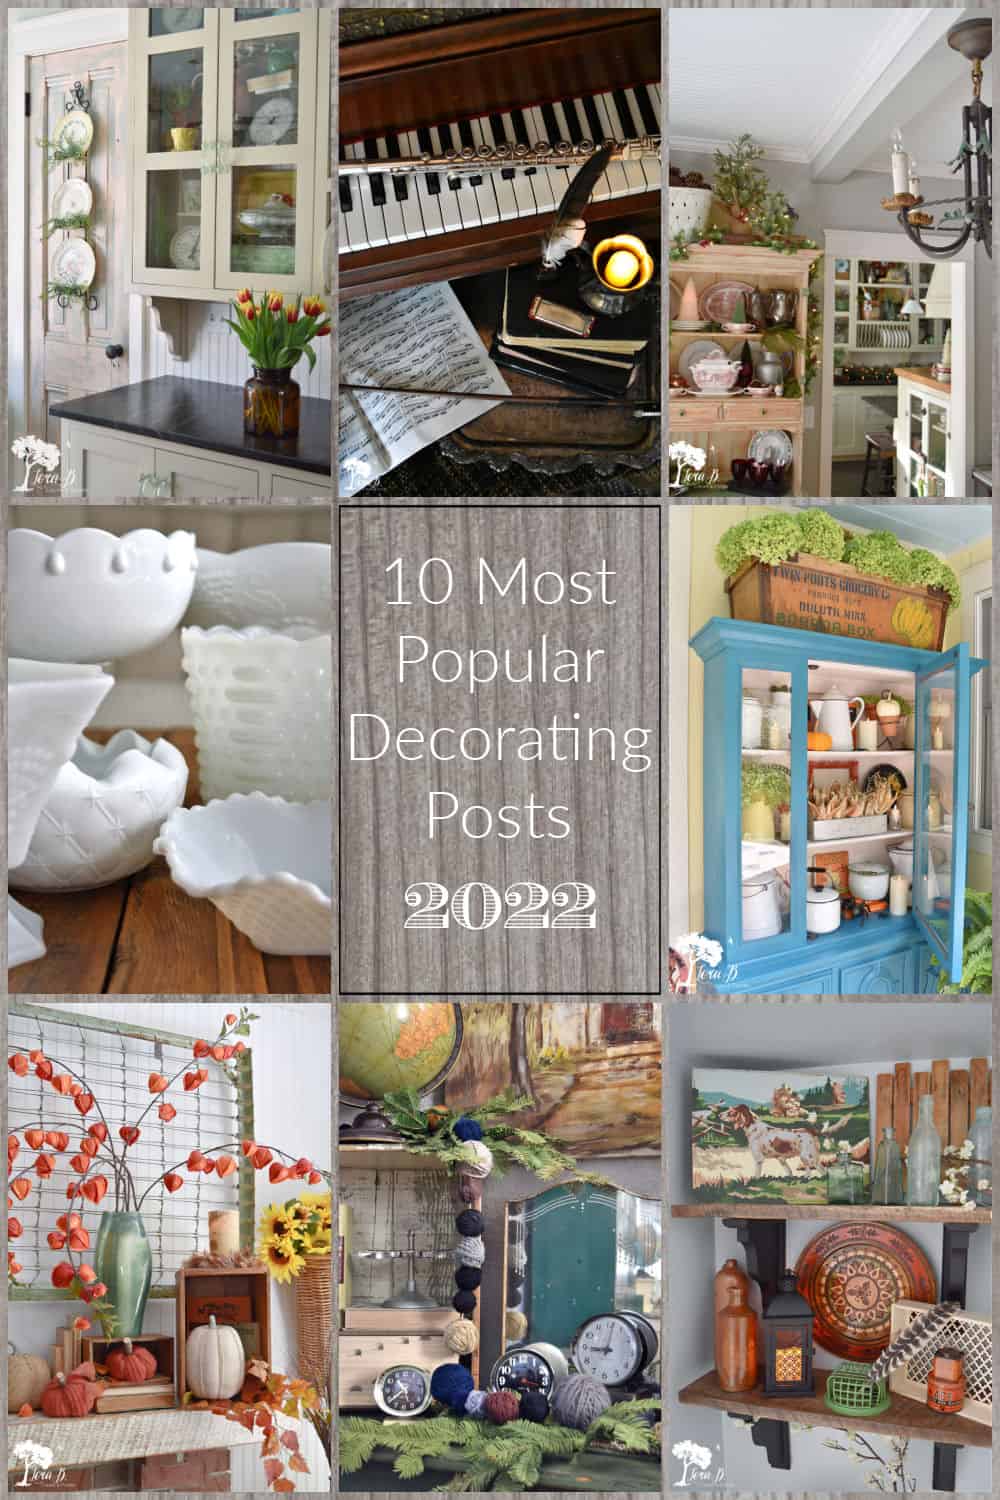 Top 10 Most Popular Decorating Posts of 2022